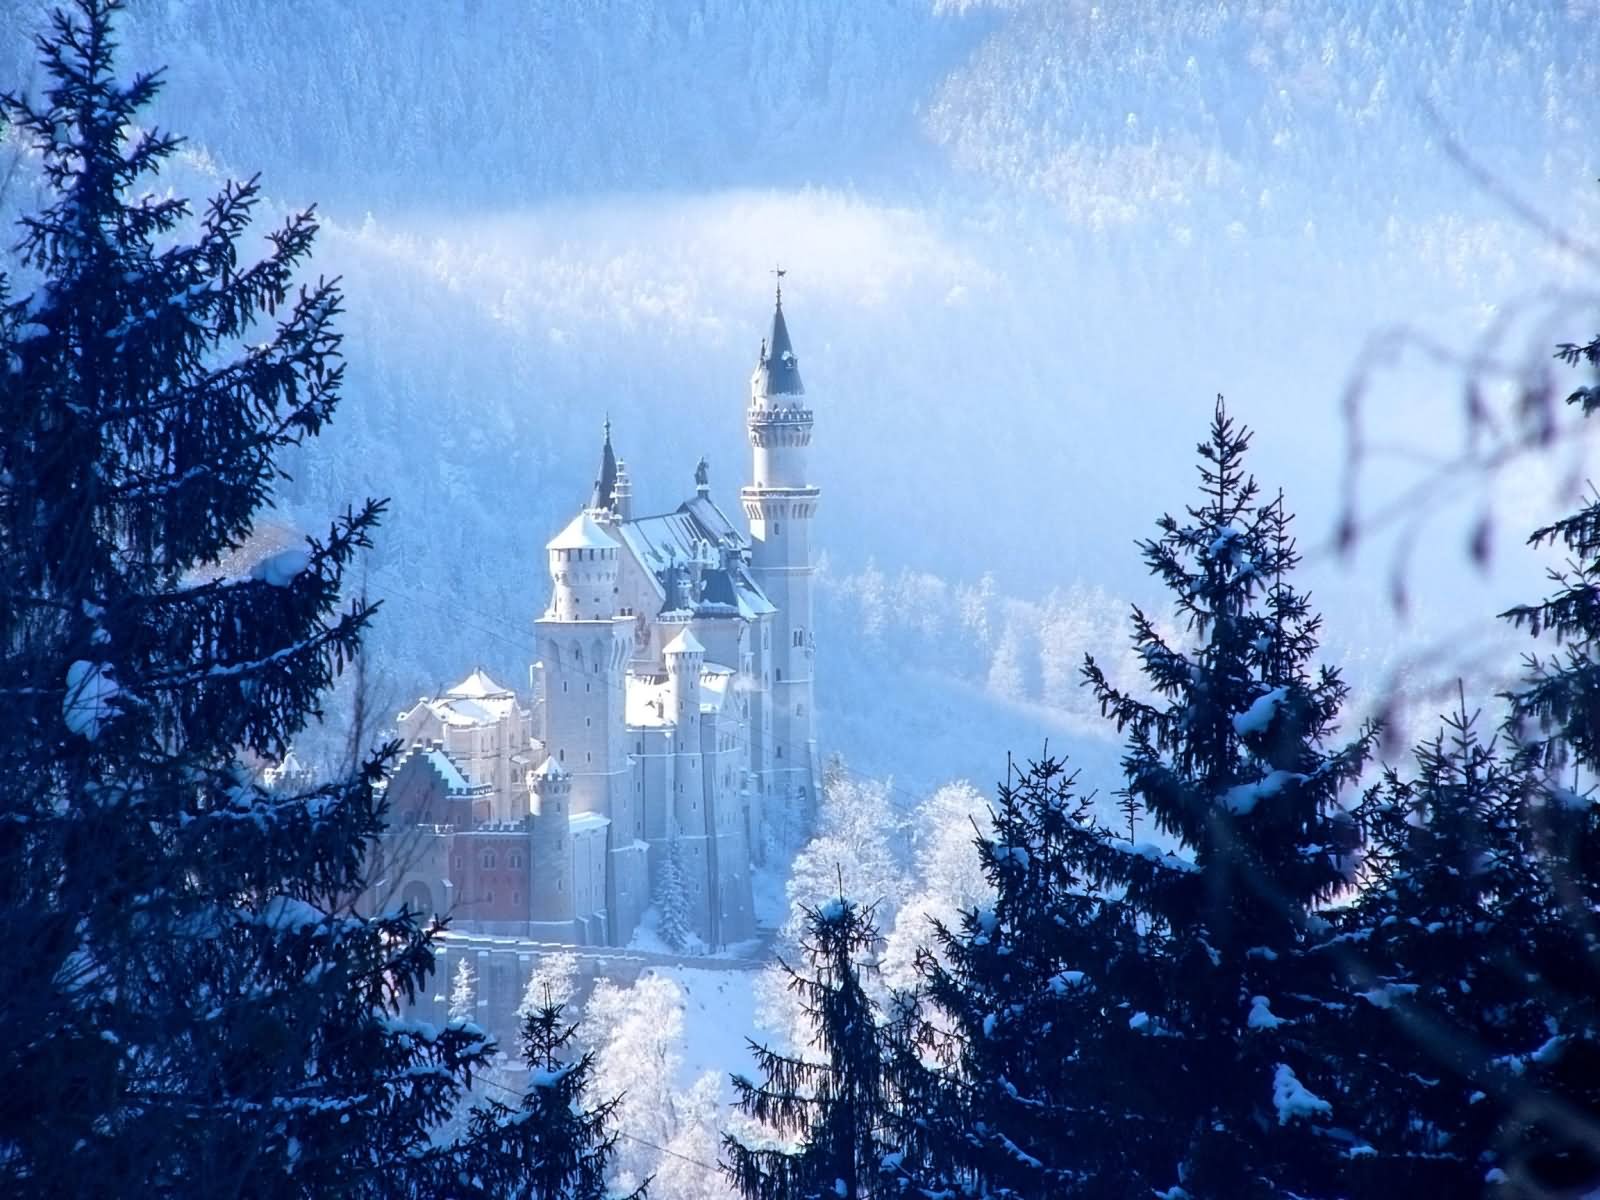 Amazing Picture Of The Neuschwanstein Castle With Snow Picture